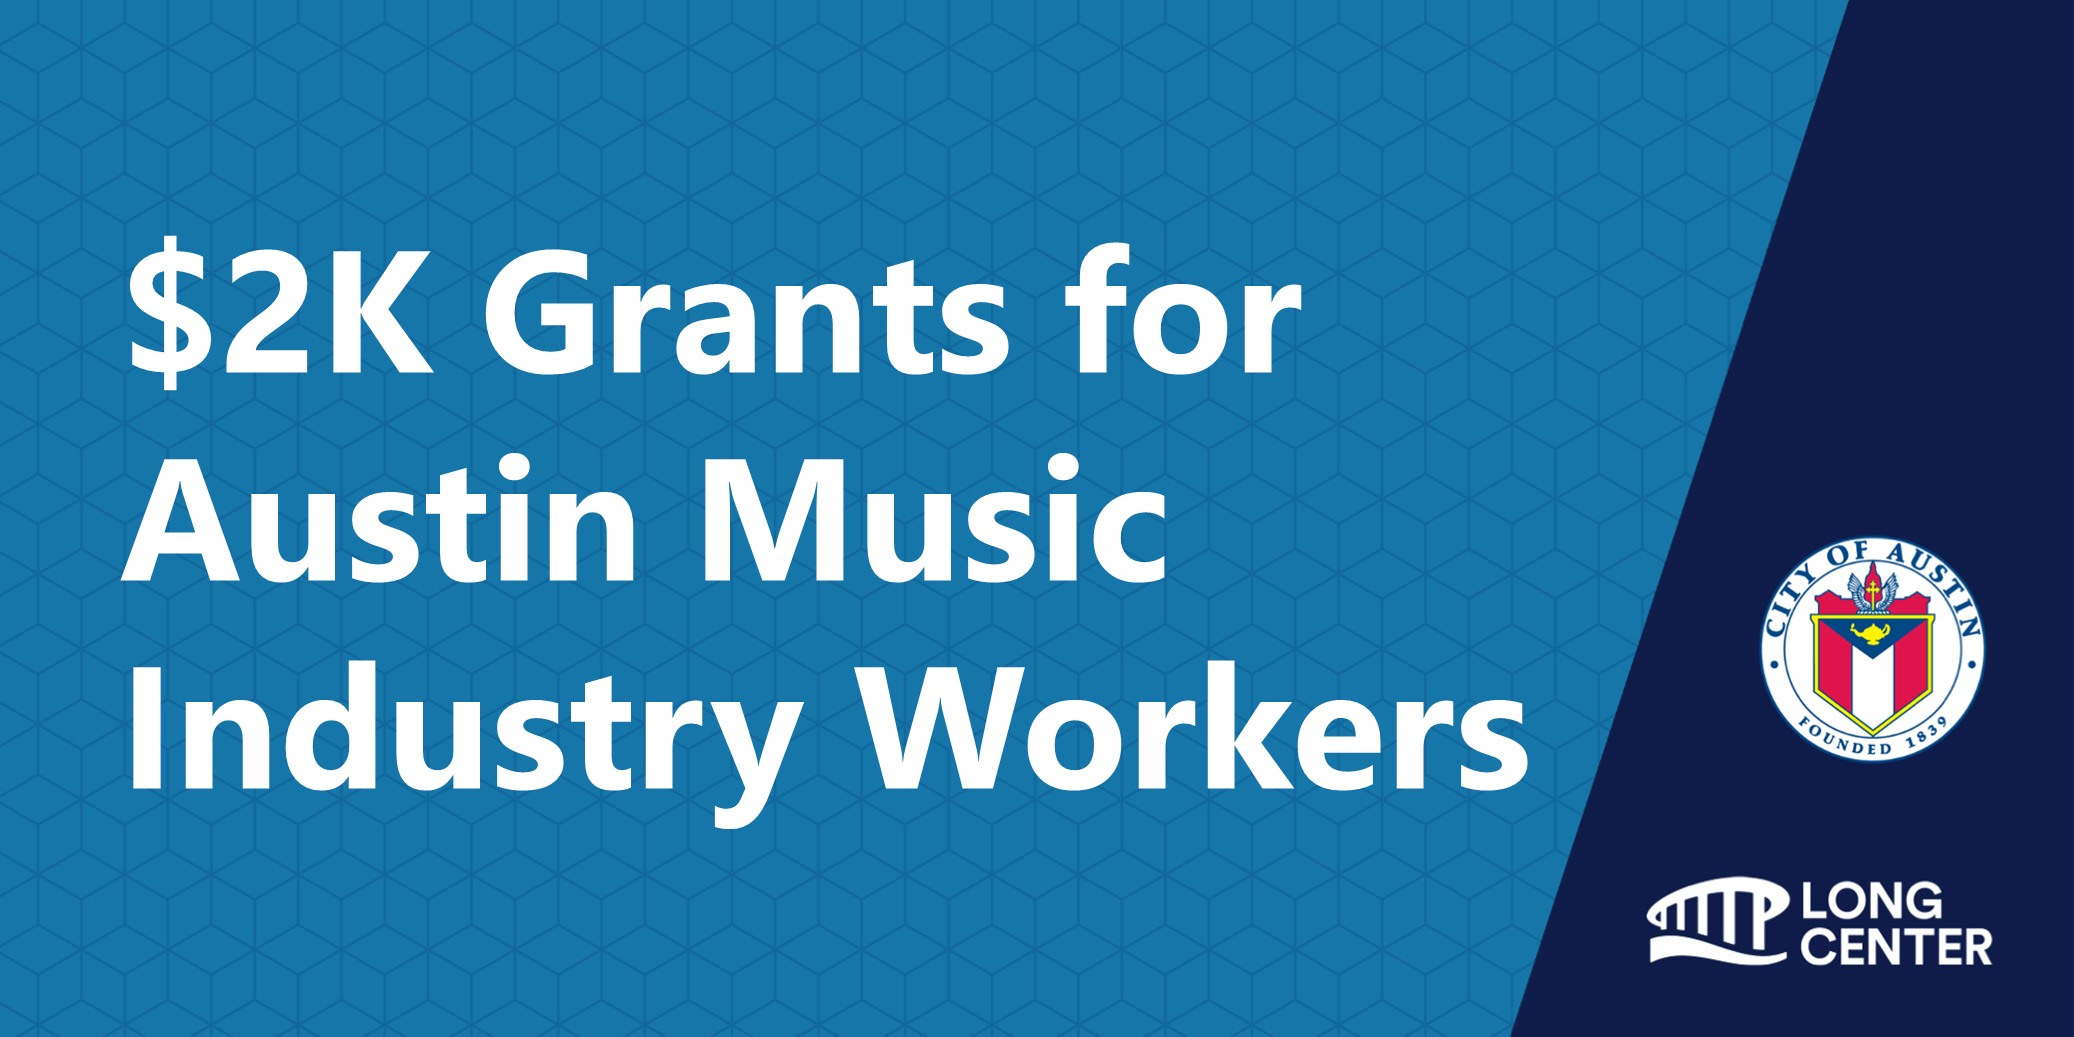 $2k Grant for Austin Music Industry Workers promo image